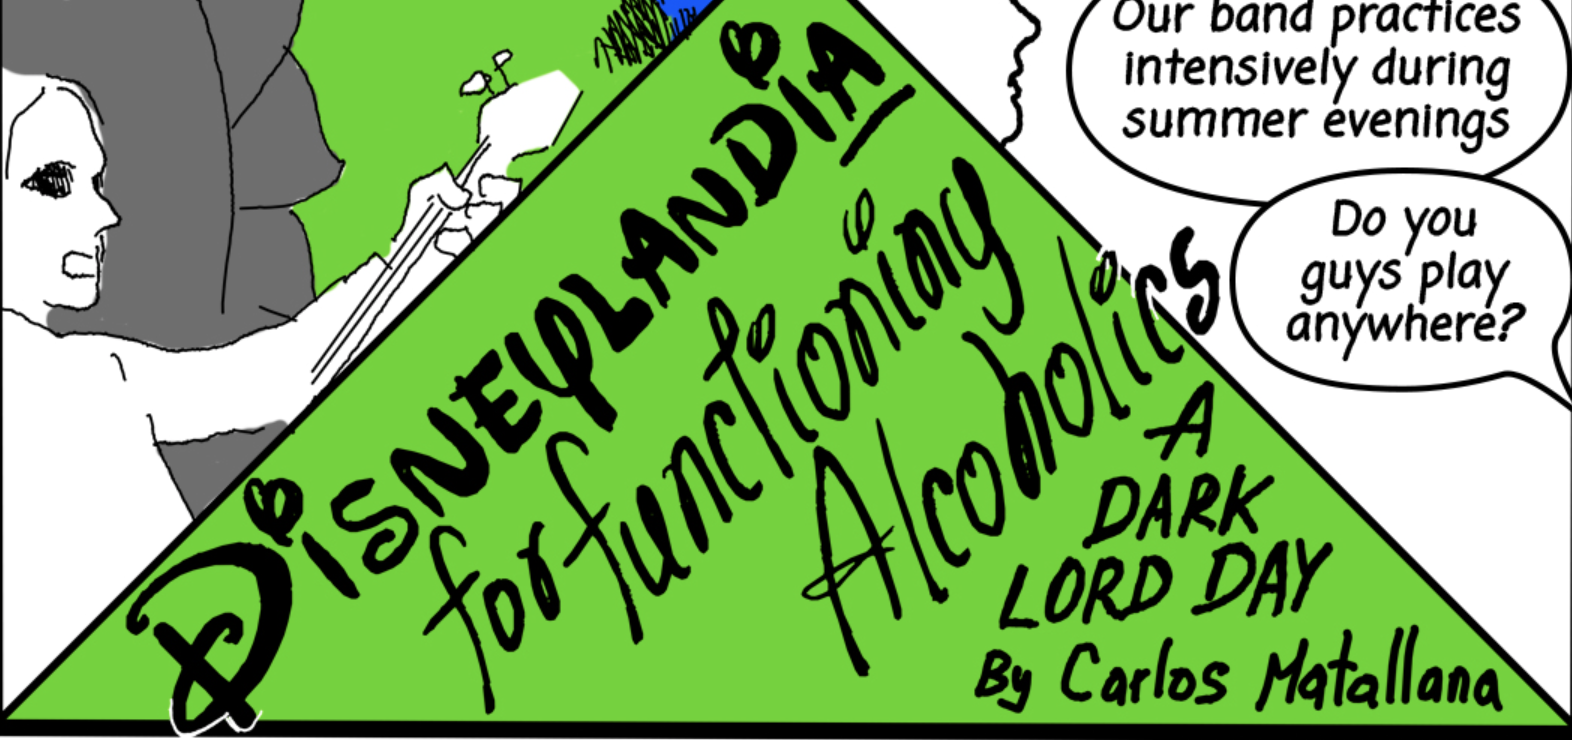 Disneylandia for Functioning Alcoholics: a Dark Lord Day Comic